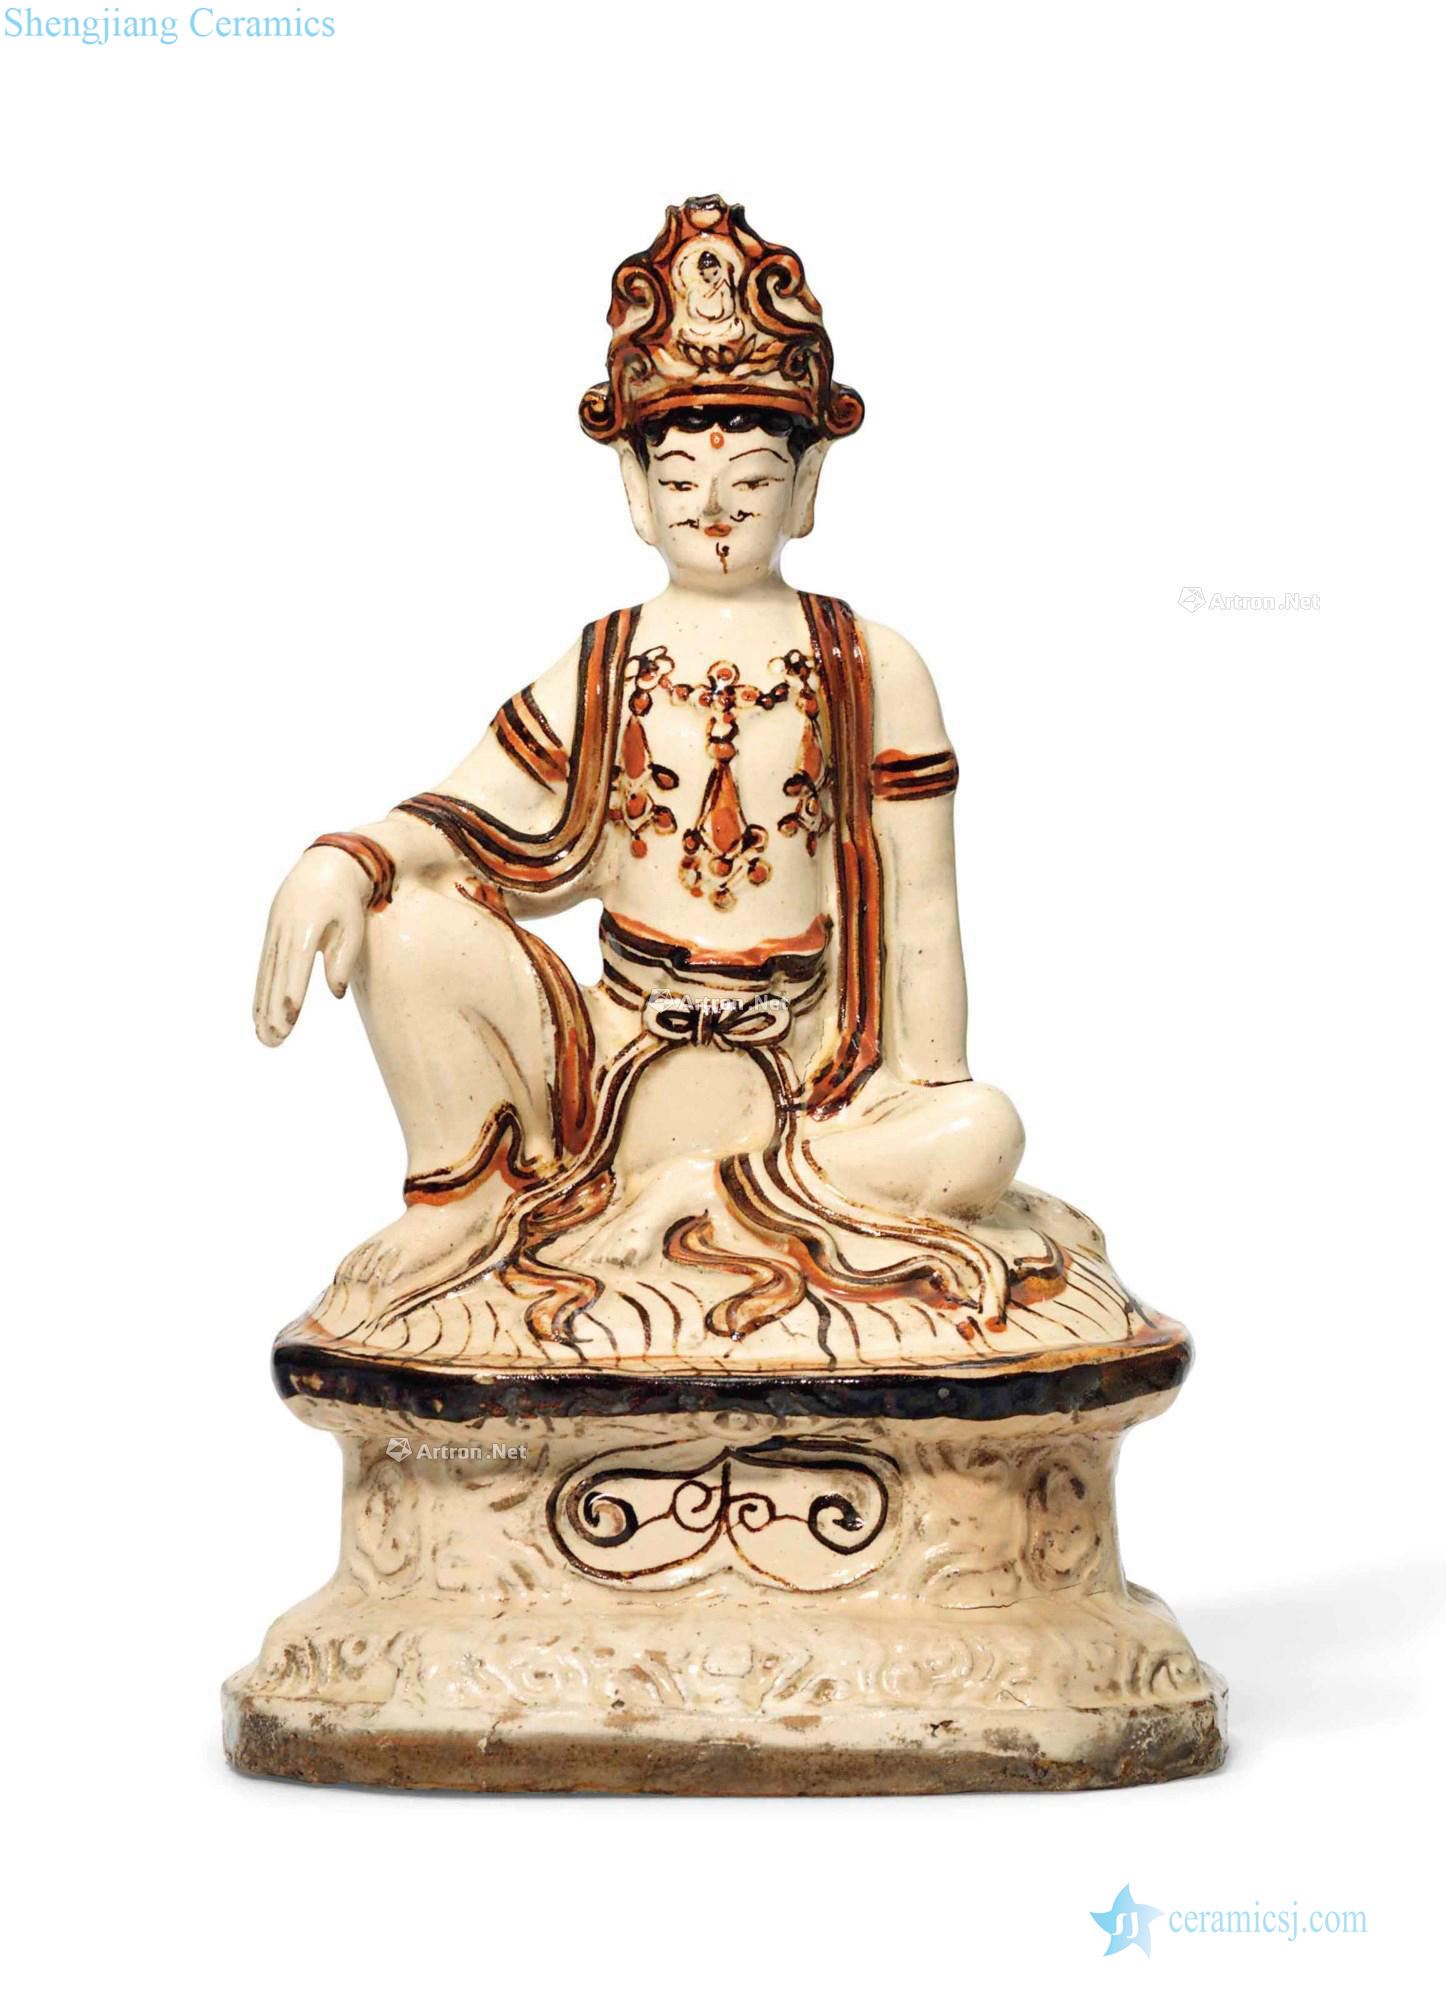 Yuan; Ming; In the 14th century. In the 15th century Magnetic state kiln craft Buddha statue